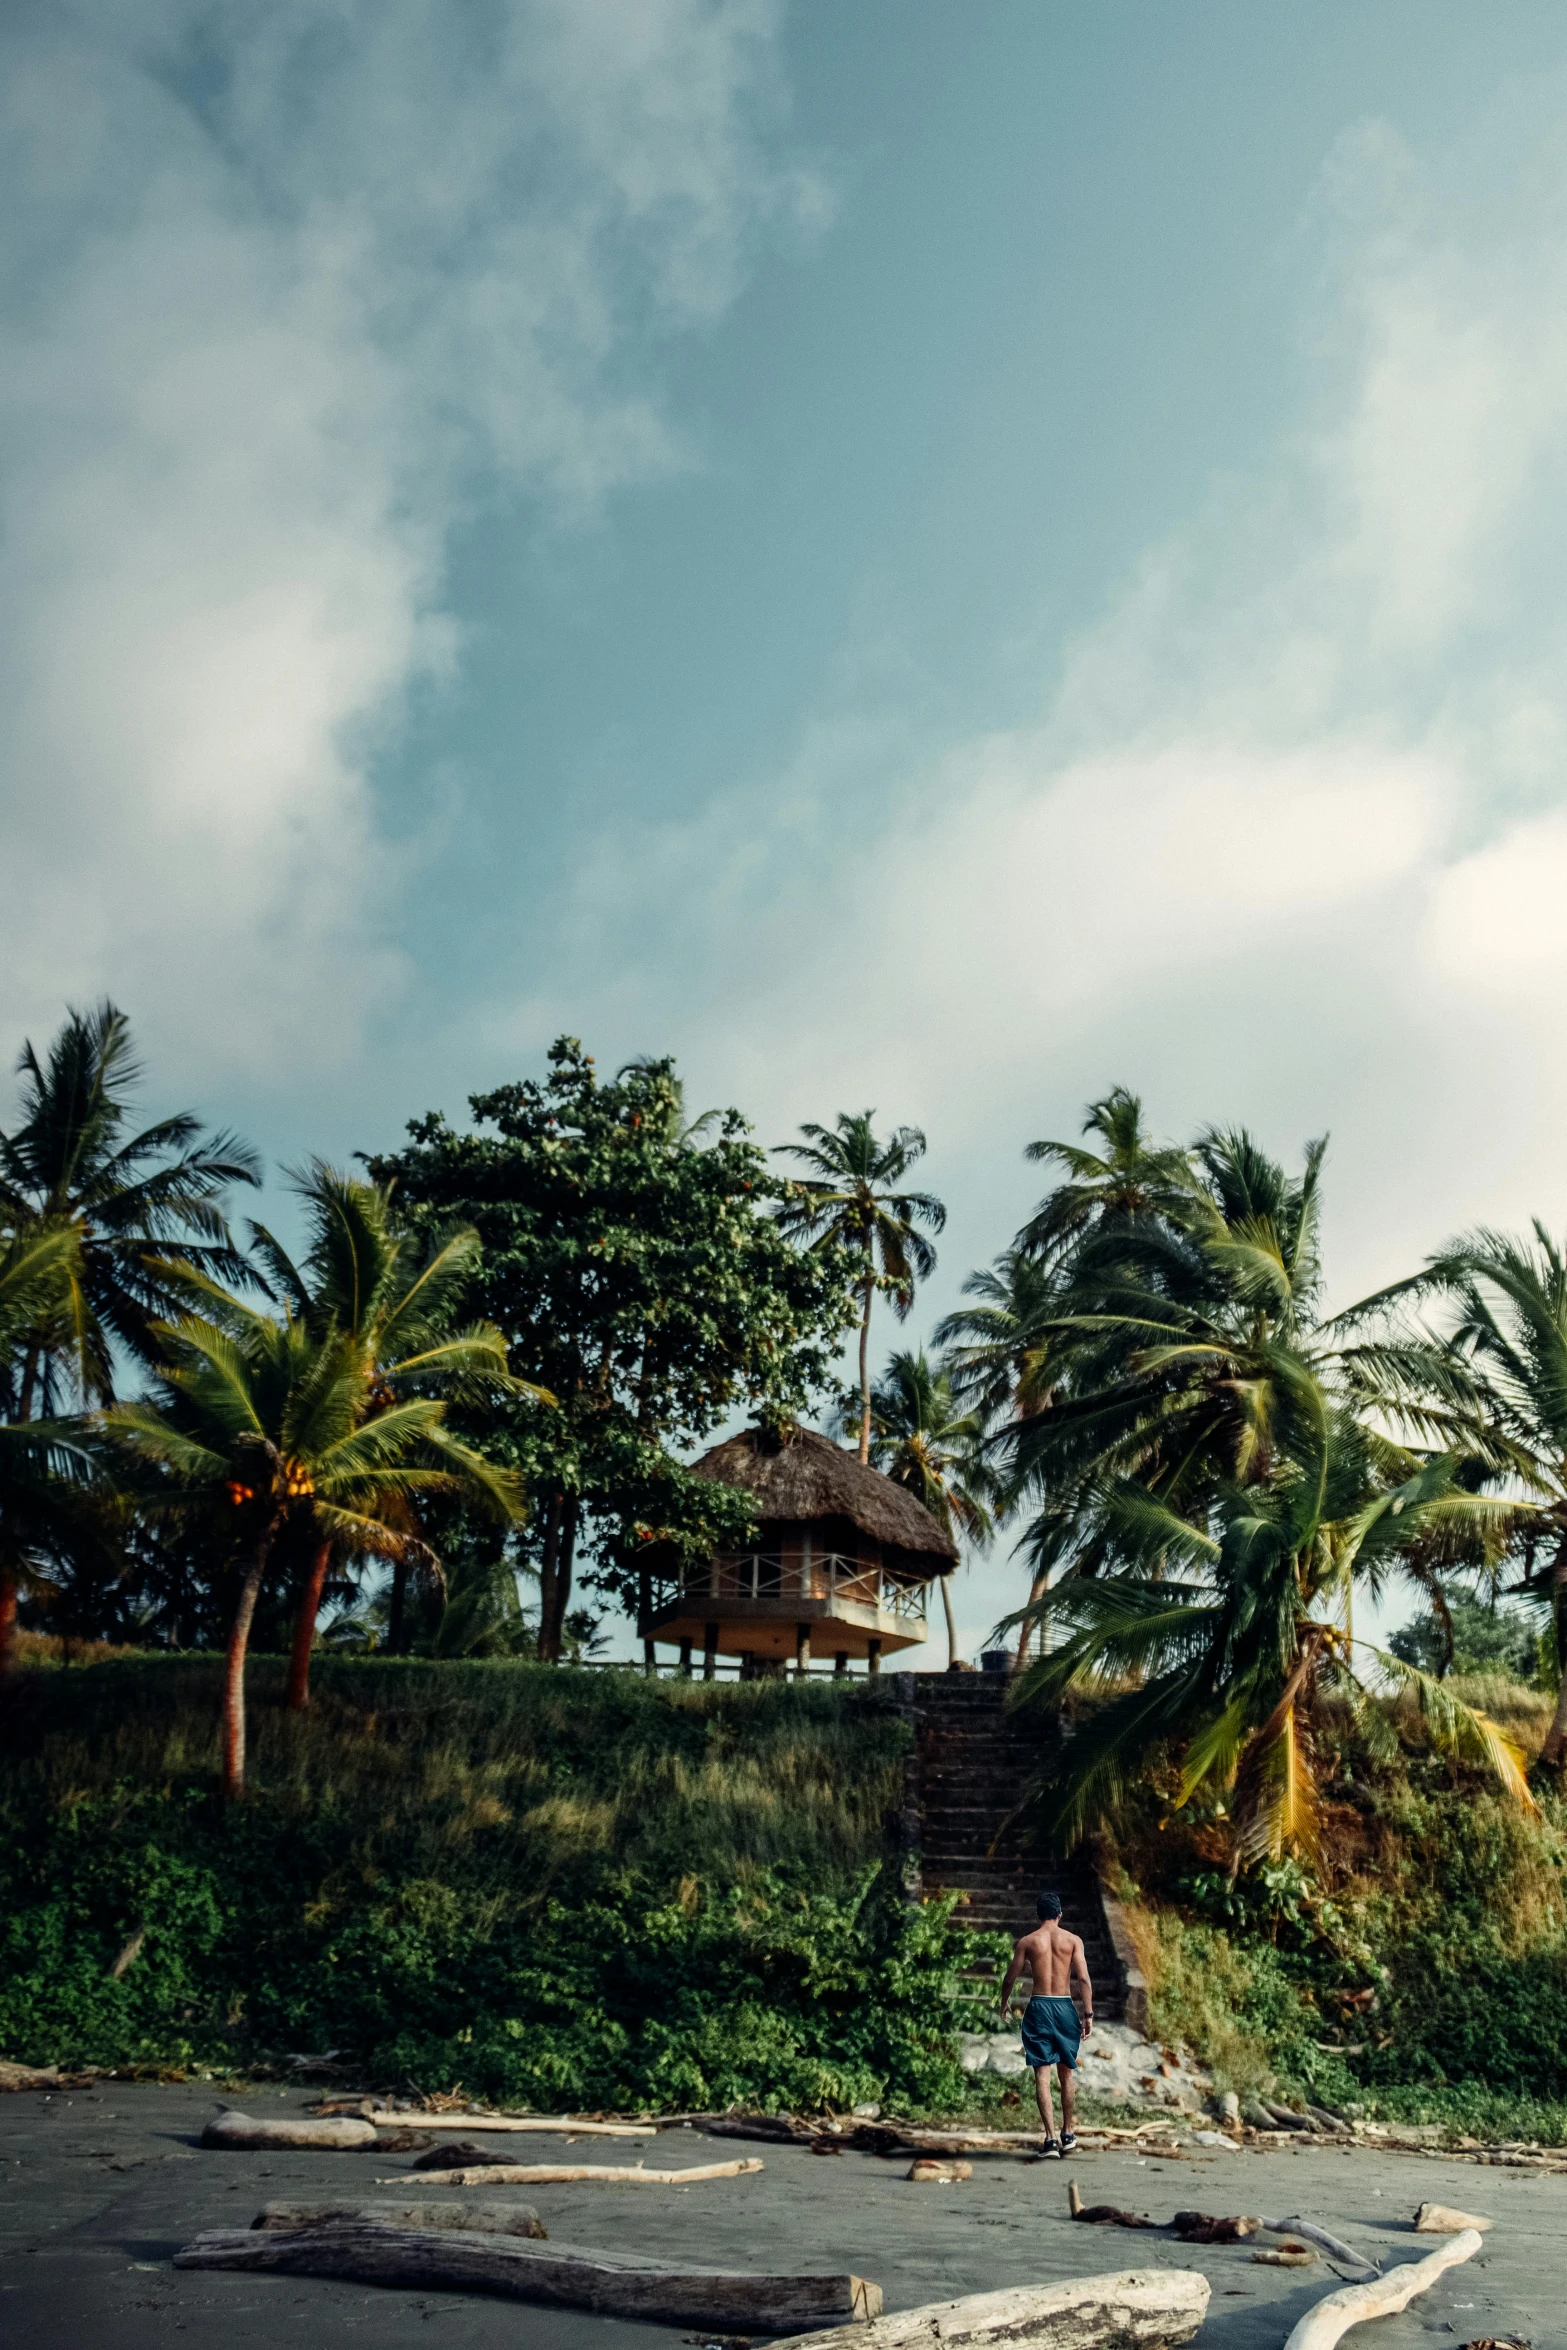 a man riding a surfboard on top of a sandy beach, tribe huts in the jungle, house on a hill, banana trees, cinematic photograph